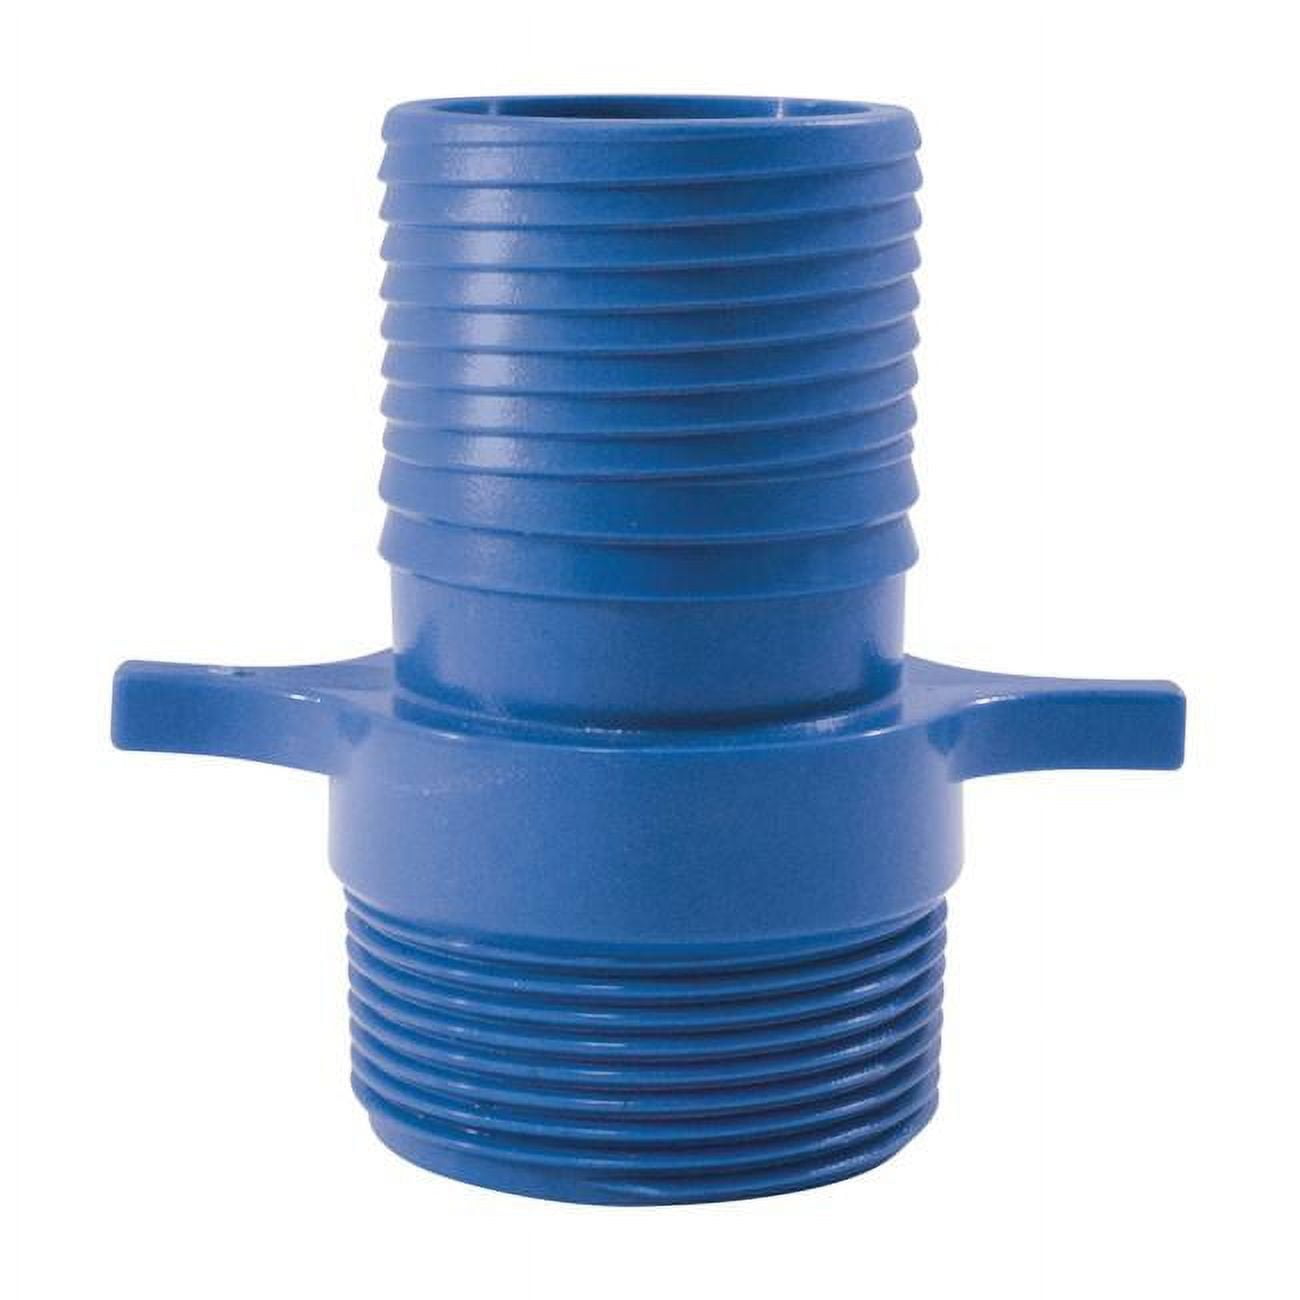 4814877 1.5 In. Insert X 1.5 In. Dia. Mpt Polypropylene Male Adapter, Blue